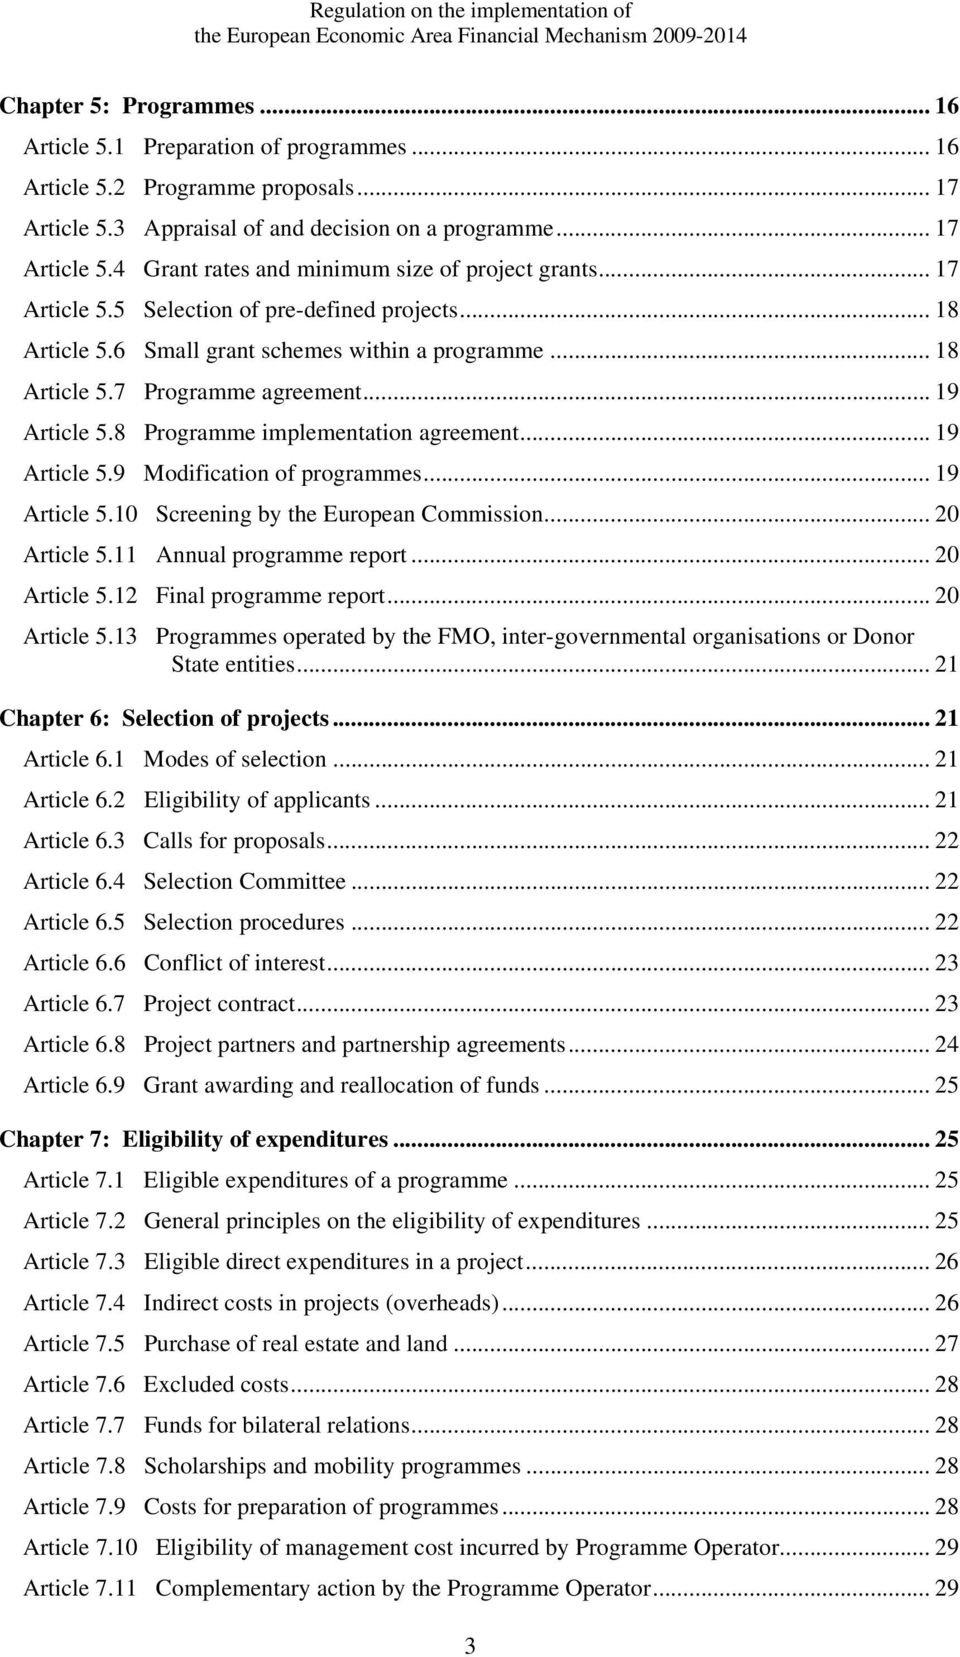 .. 19 Article 5.9 Modification of programmes... 19 Article 5.10 Screening by the European Commission... 20 Article 5.